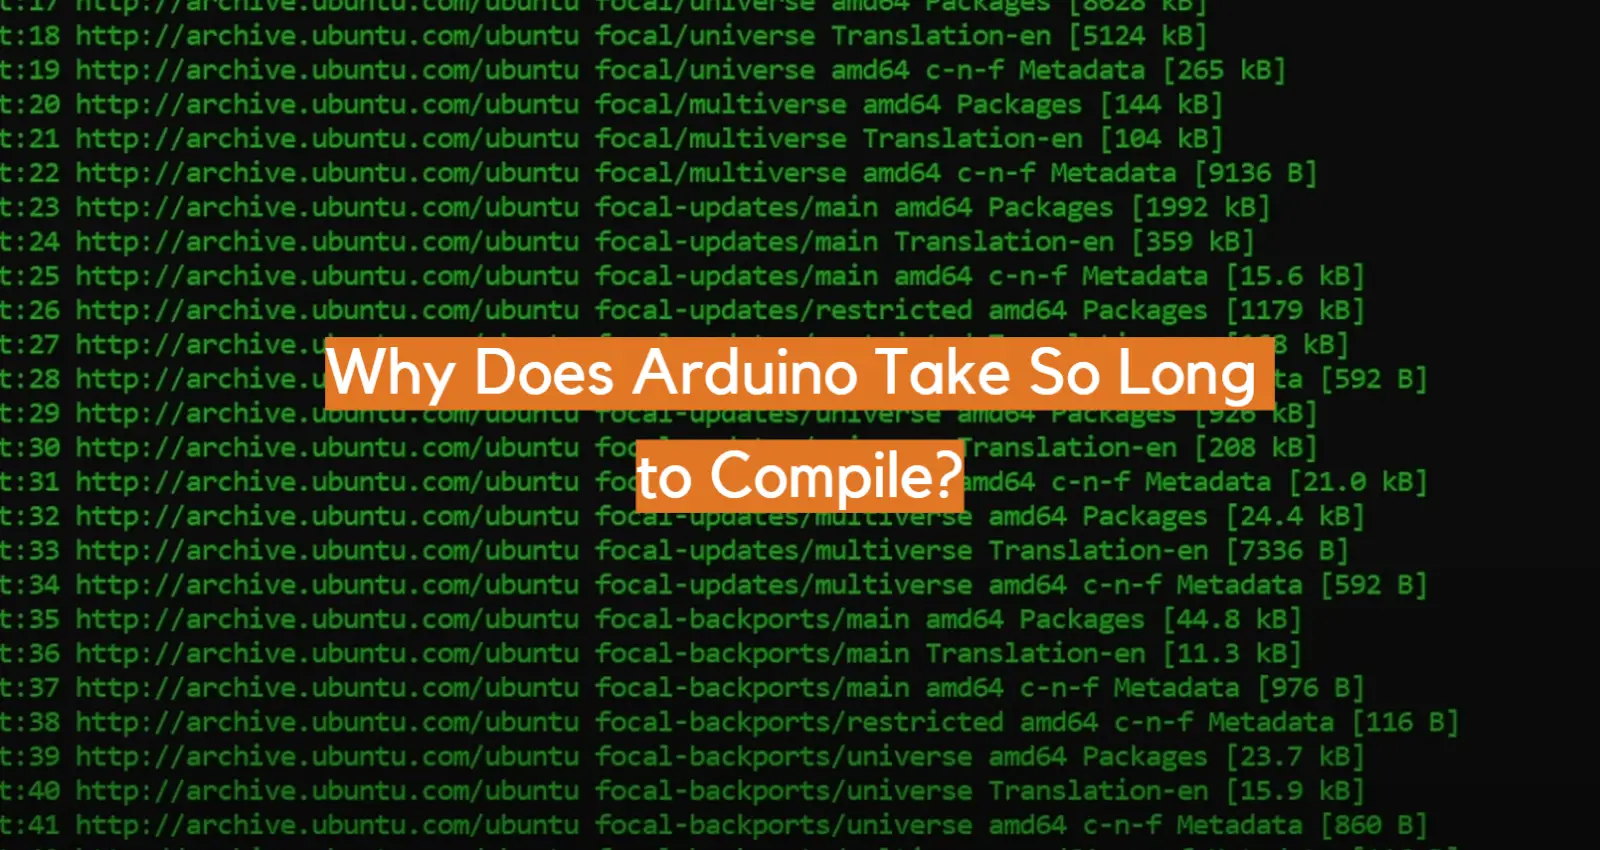 Why Does Arduino Take So Long to Compile?